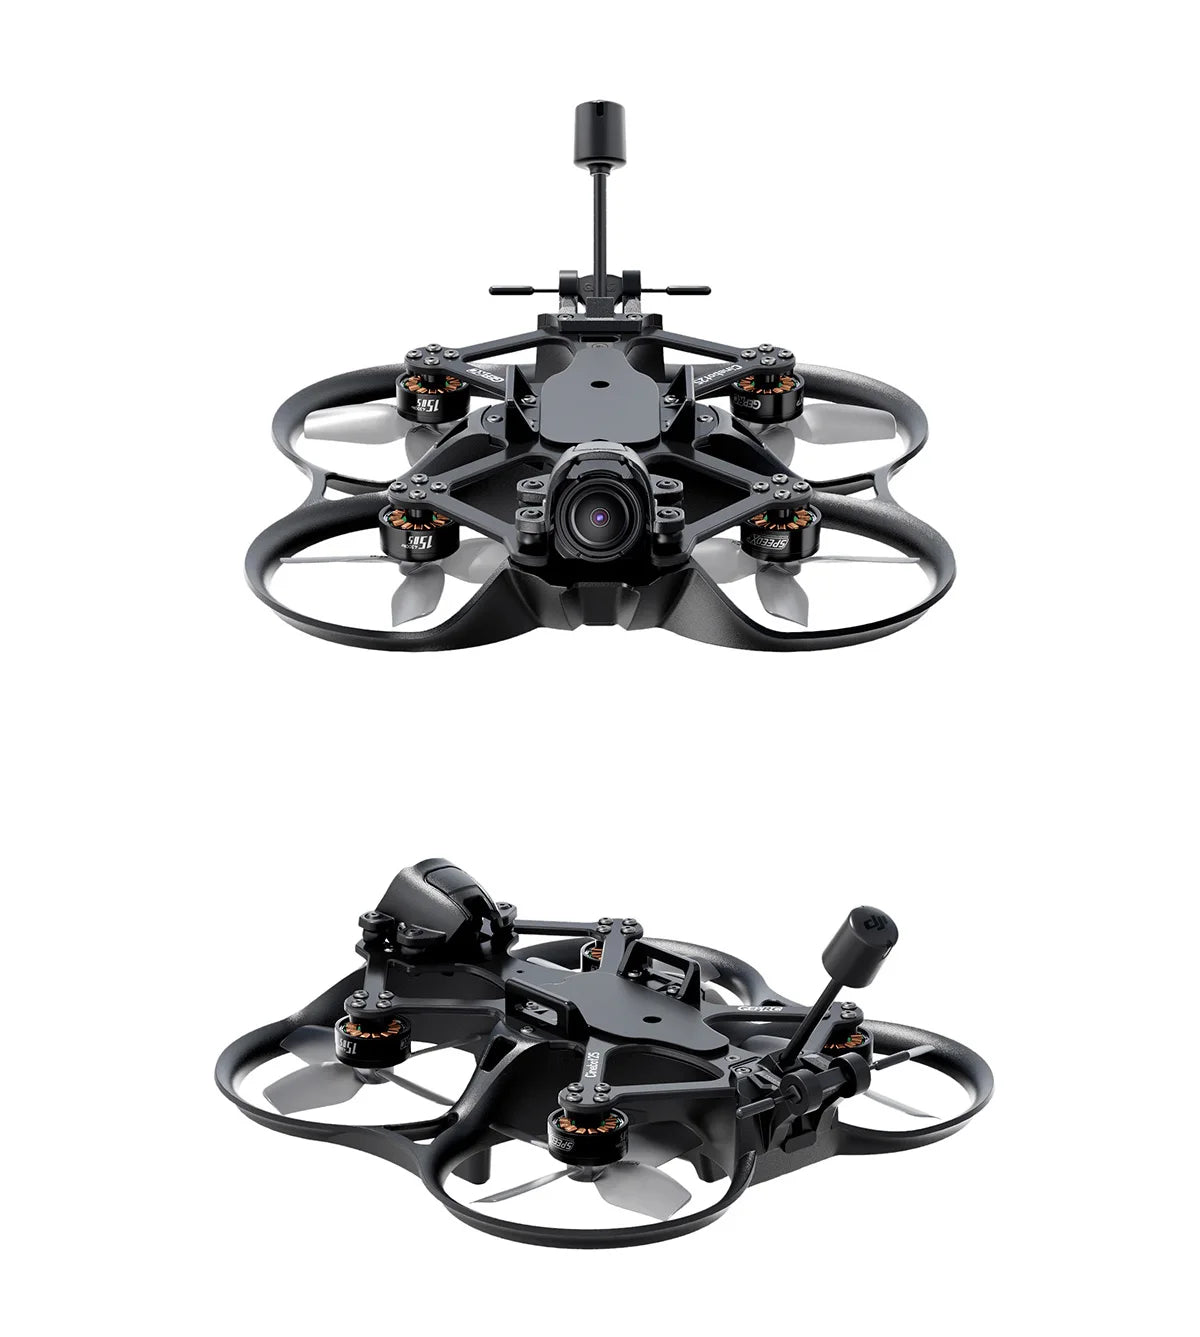 GEPRC Cinebot25 S WTFPV 2.5inch FPV Drone, the TYPE-C and BOOT button on the rear makes parameter adjustment convenient